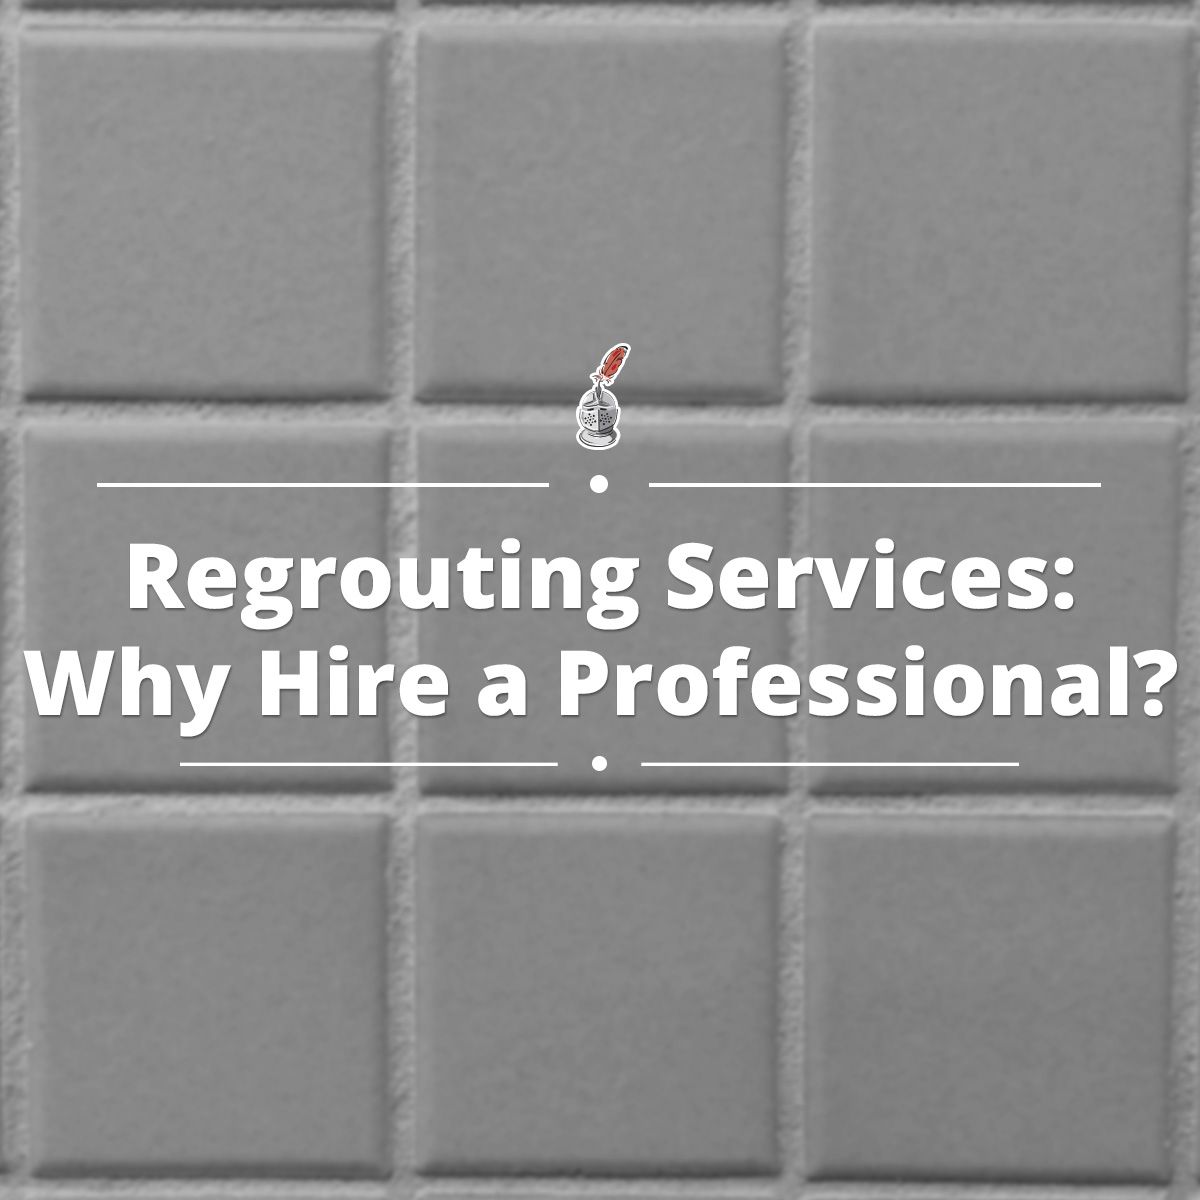 Regrouting Services: Why Hire a Professional?